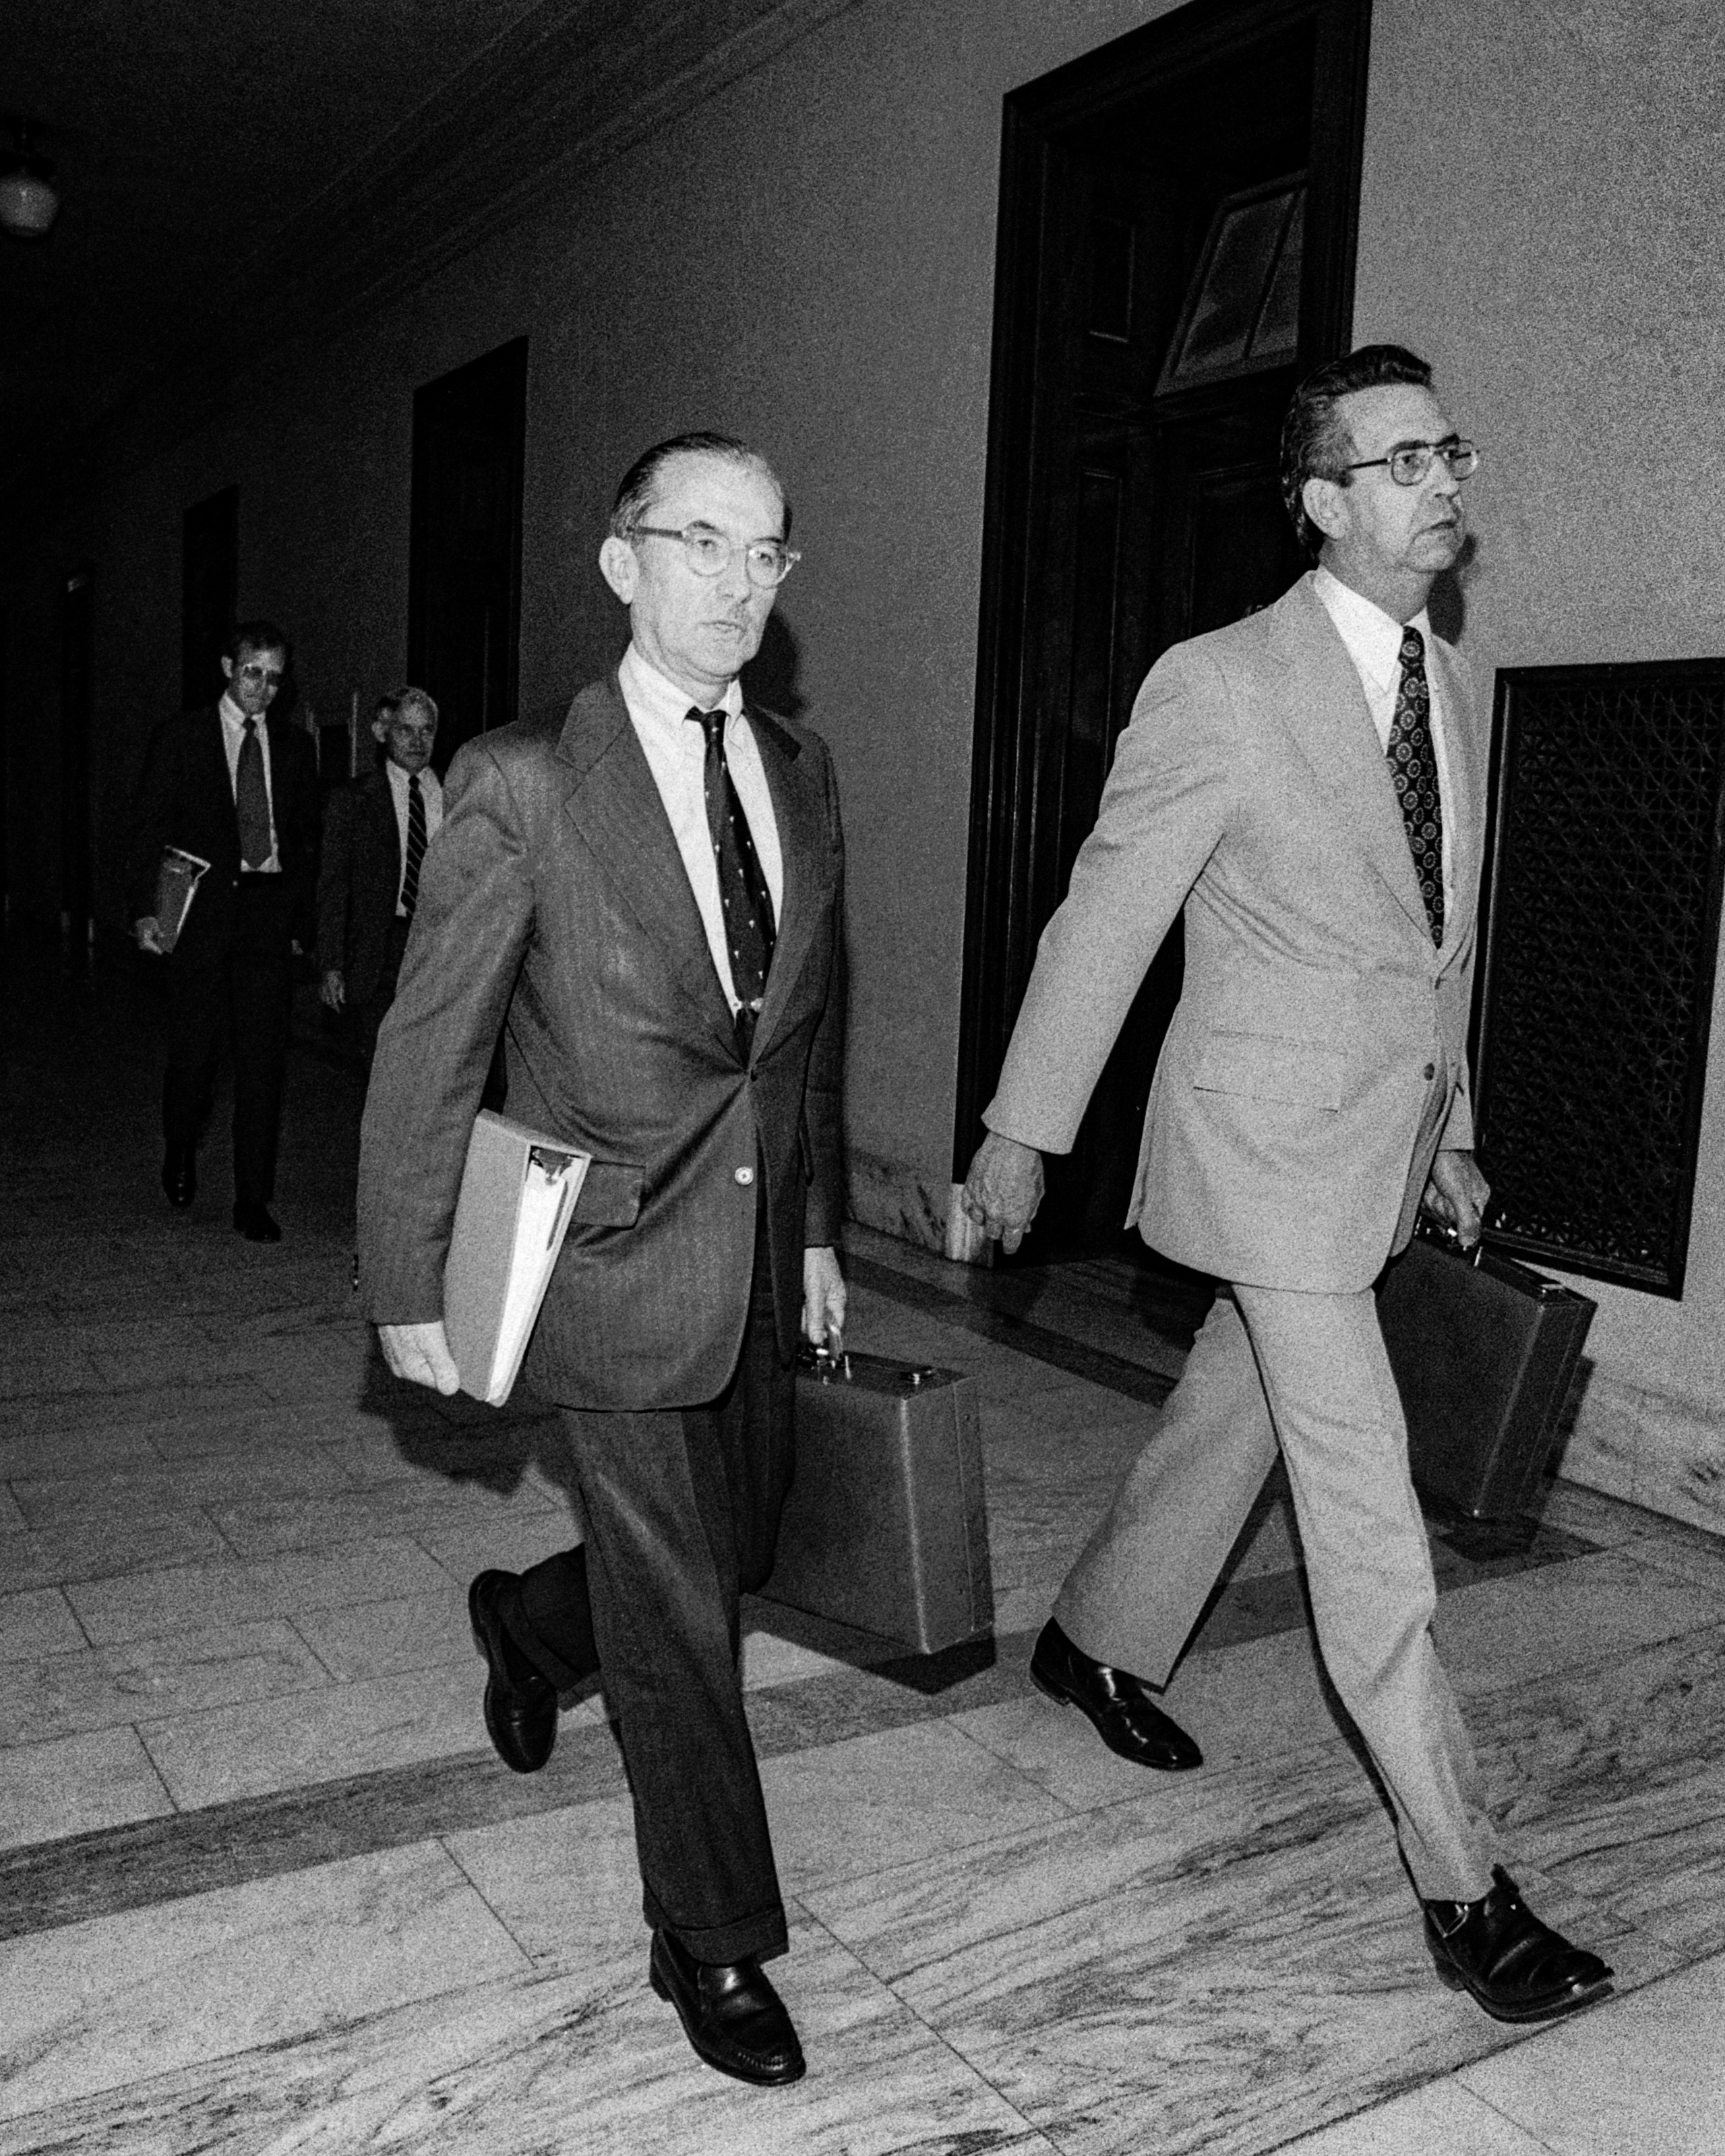 (Original Caption) Central Intelligence Agency Director William Colby, left, arrives for questioning by the Senate Intelligence Commitee 5/21, accompanied by George Cary, legislative counsel for the CIA. After the closed session Sen. Frank Church, D-Idaho, commitee chairman, said a key topic was alleged agency involvement in assassination plots.